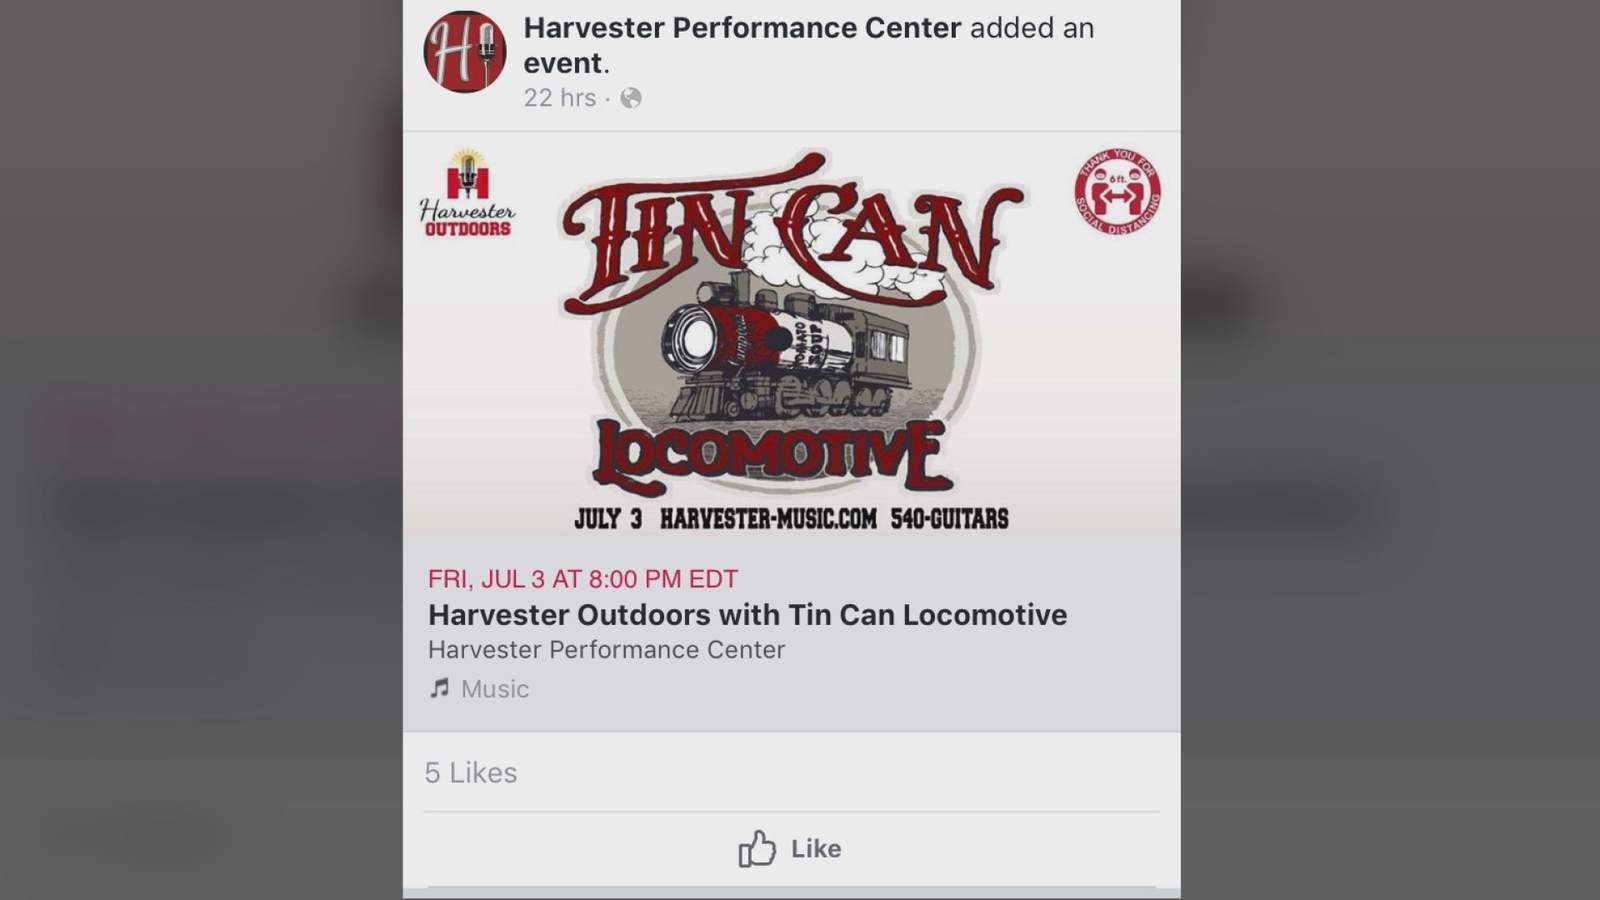 Harvester Performance Center to resume outdoor concerts next month